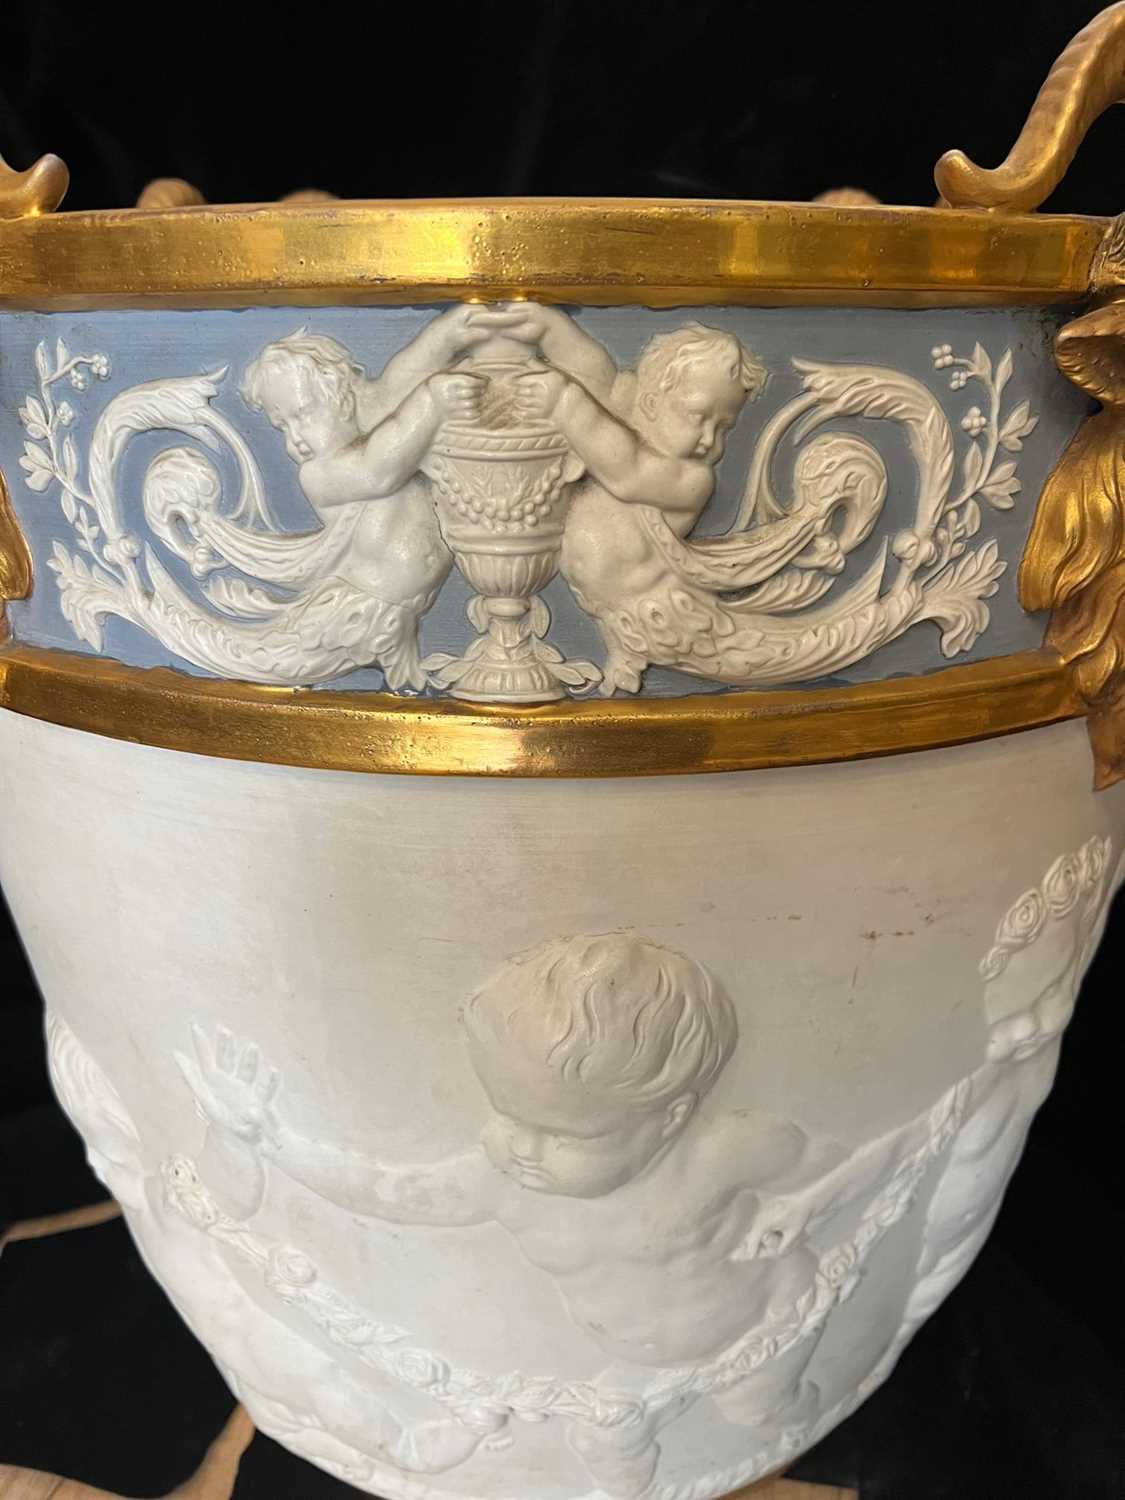 A LARGE 19TH CENTURY NEO-CLASSICAL STYLE BISQUE PORCELAIN AND PARCEL GILT JARDINIERE - Image 5 of 9